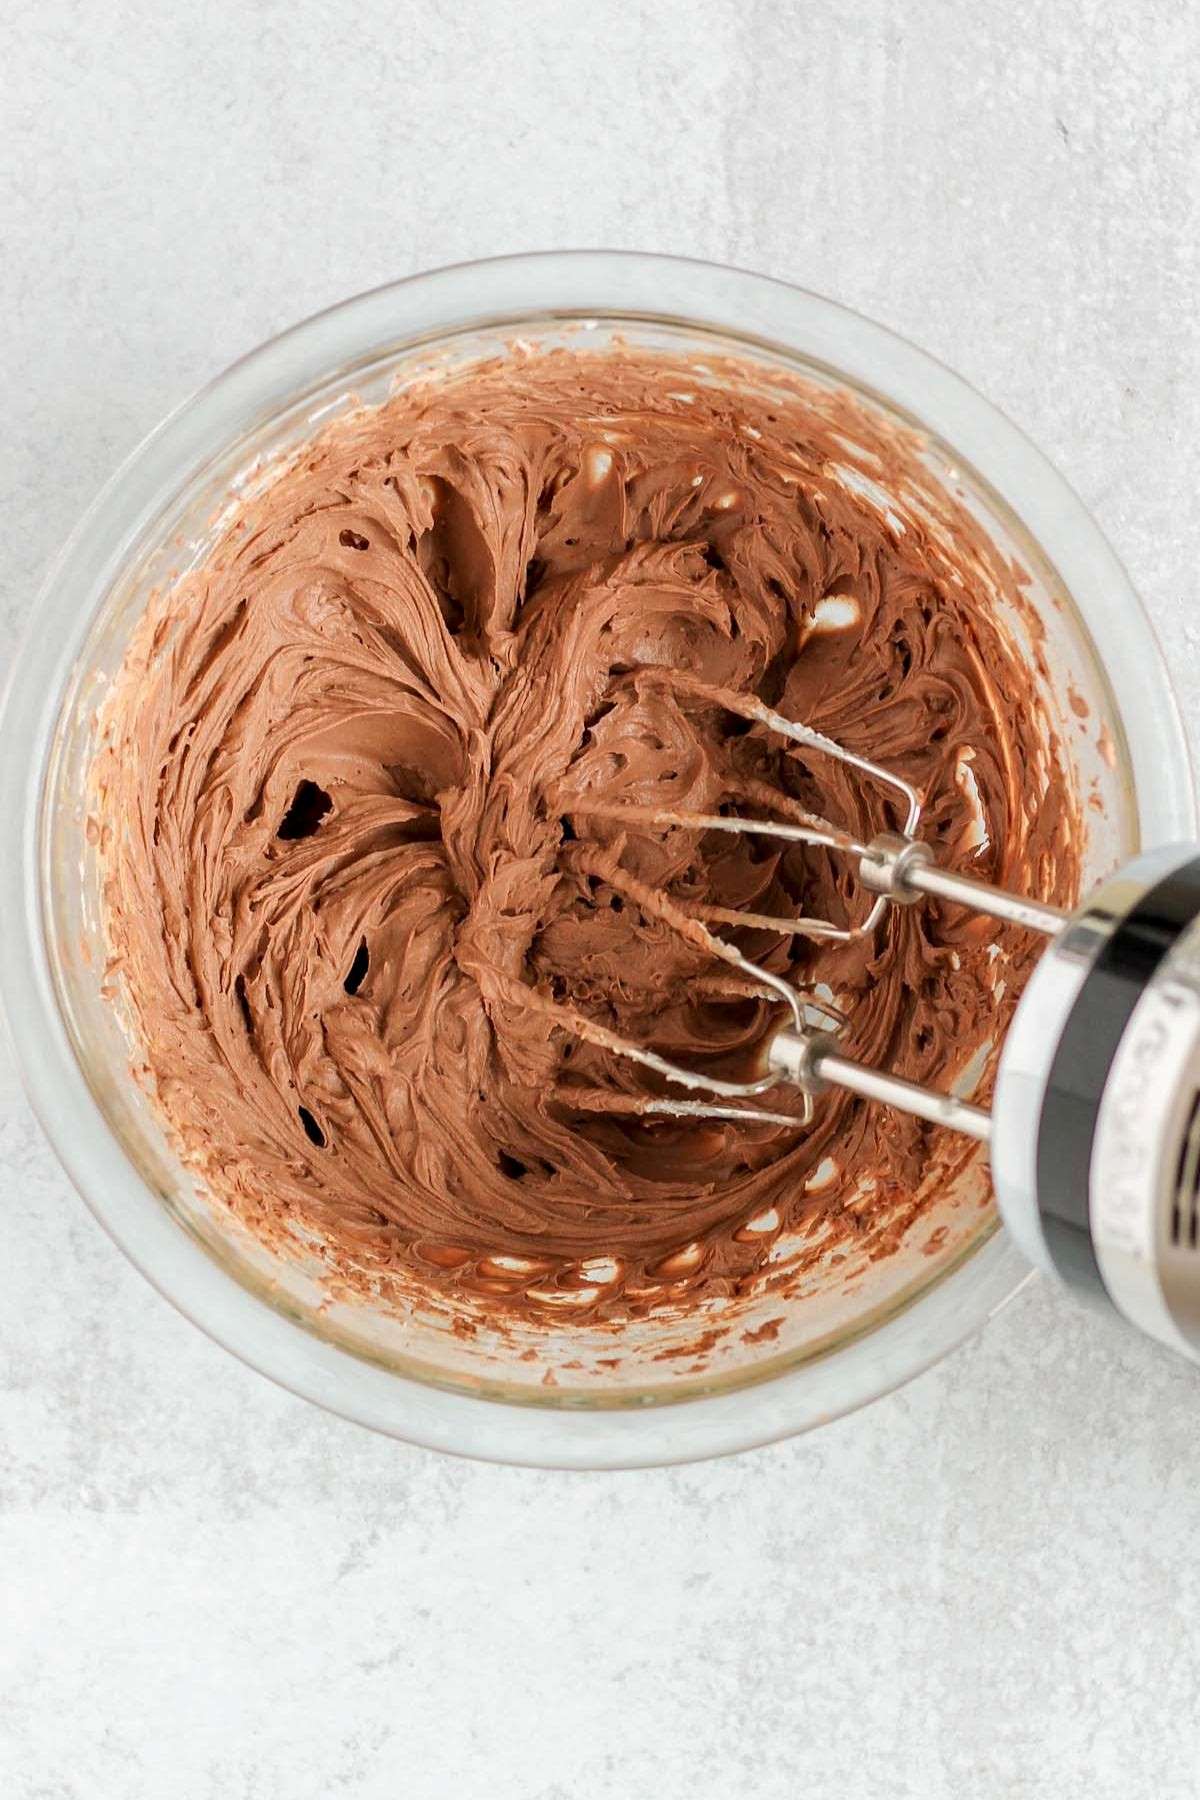 Vegan chocolate mousse whipped in a mixing bowl with a hand-held blender.